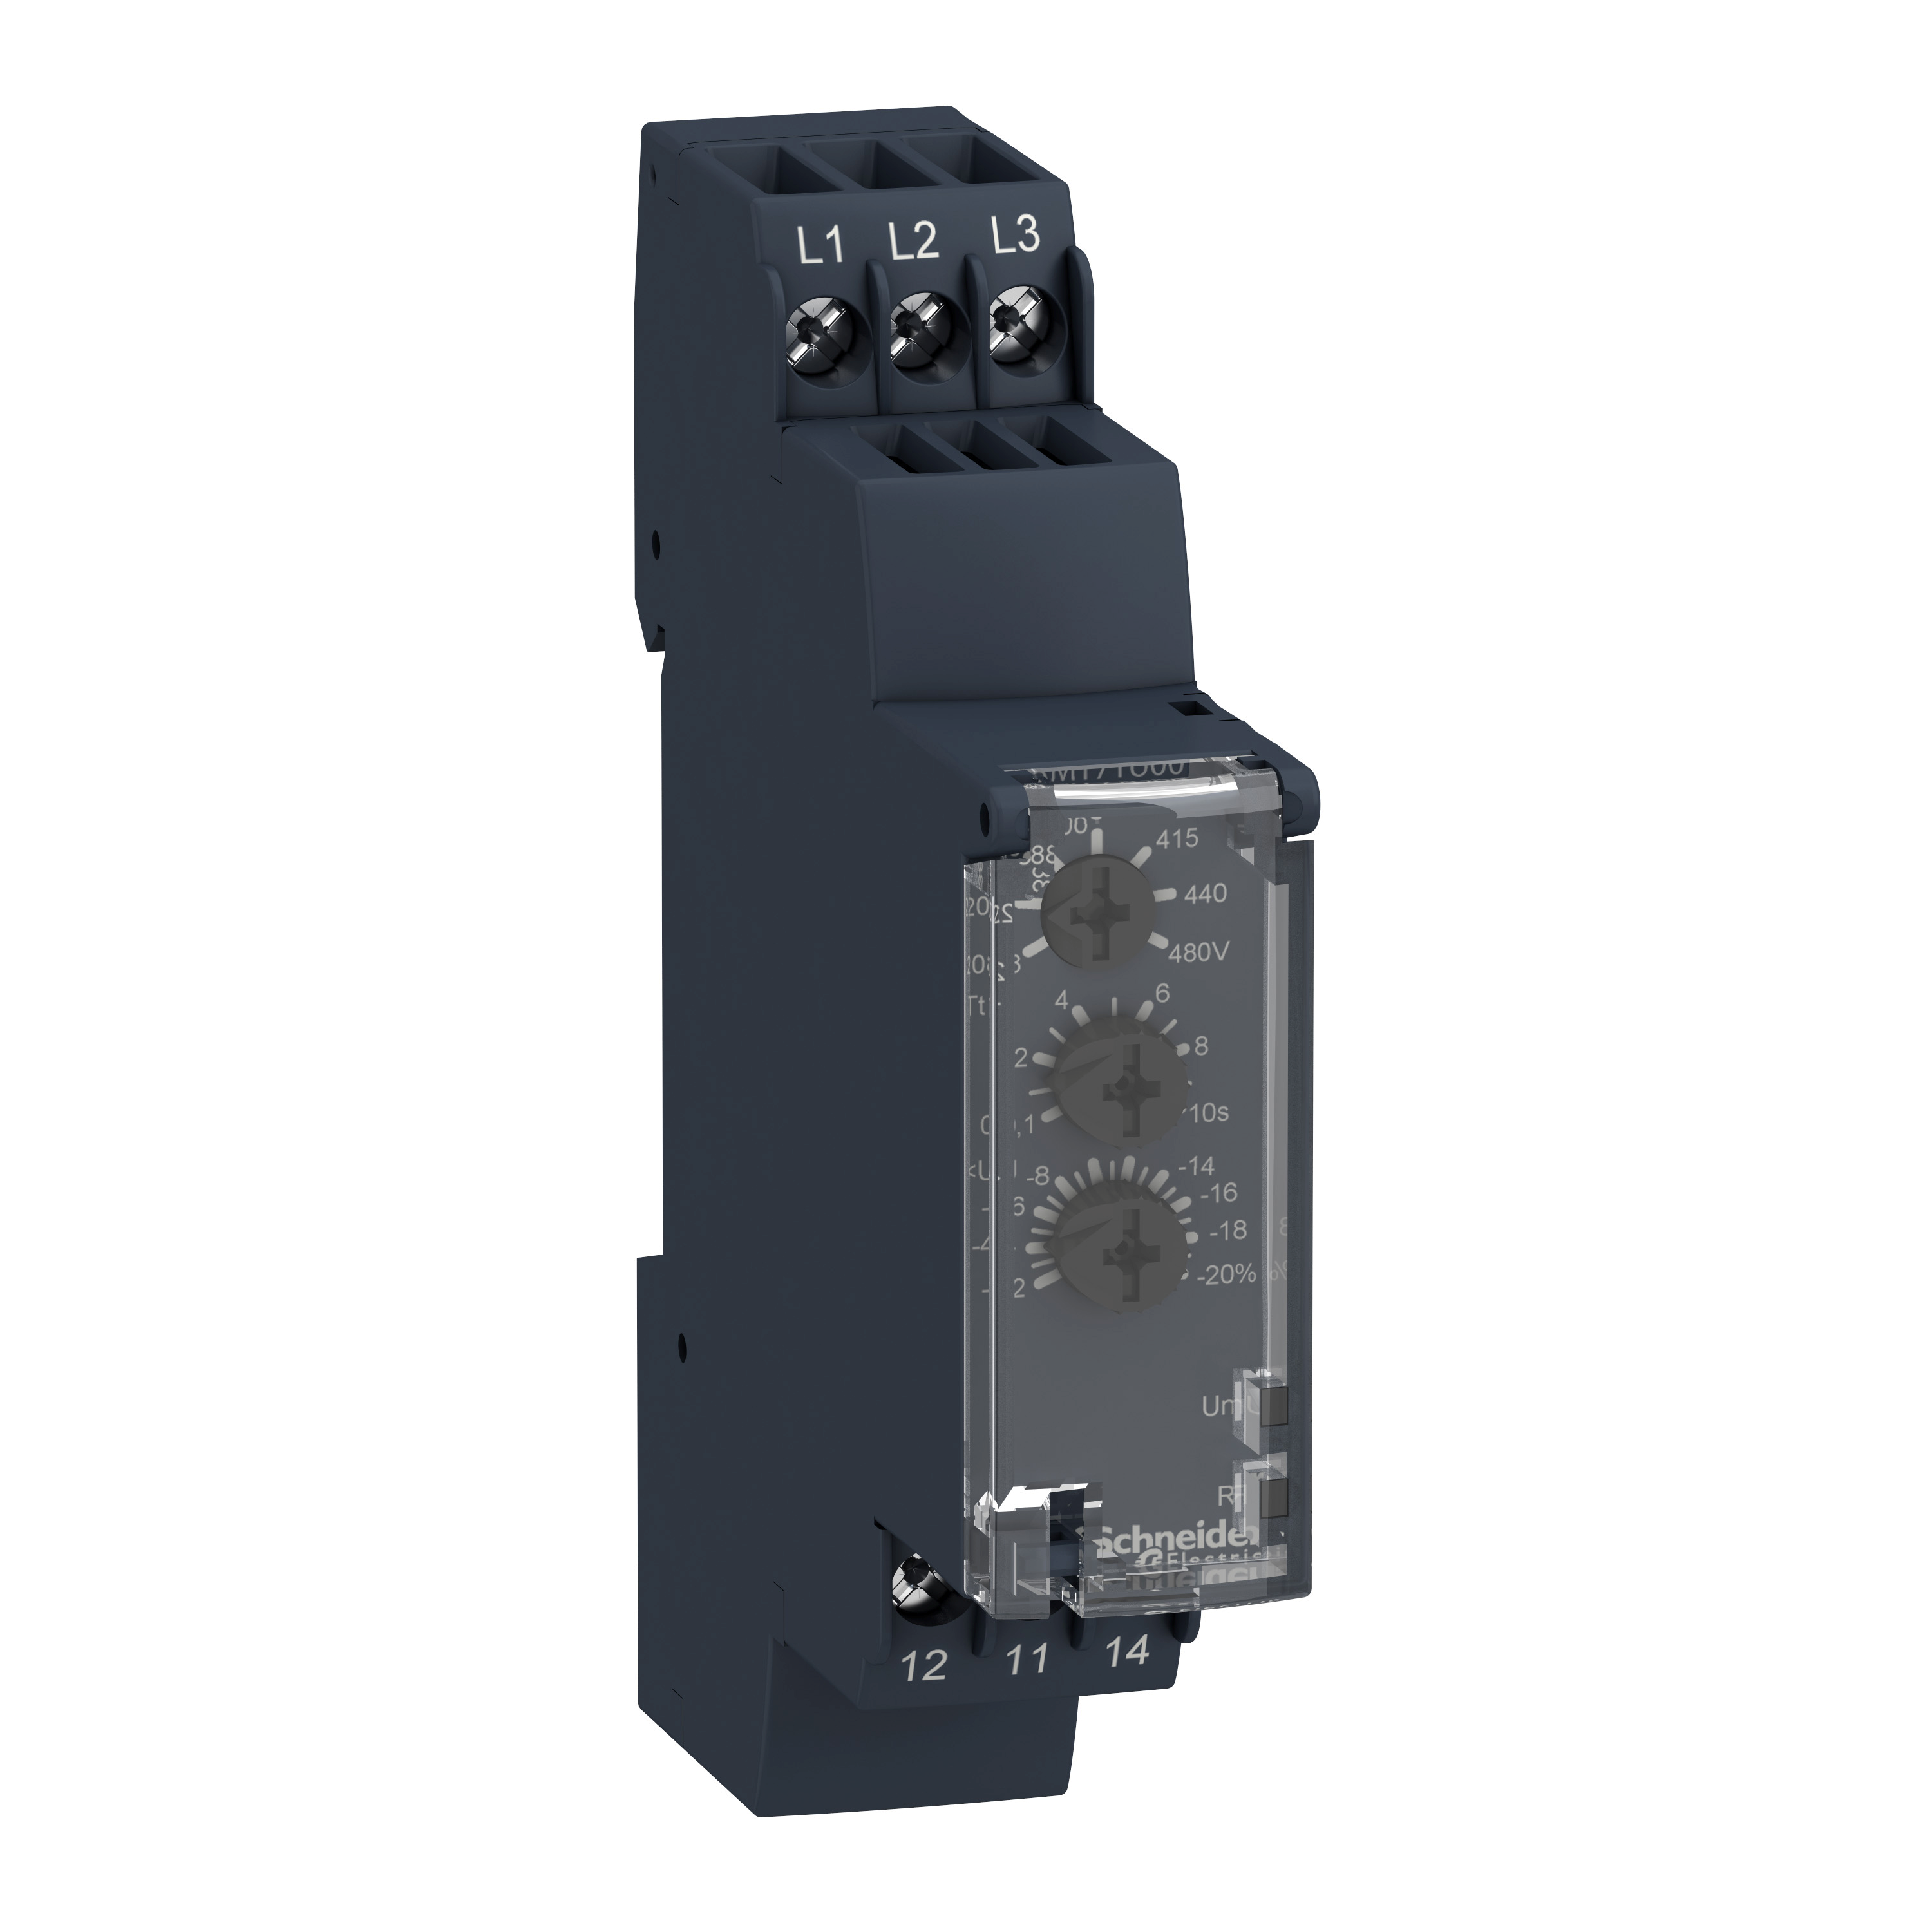 3-phase control relay, Harmony Control Relays, 5A, 1CO, undervoltage detection, 208...480V AC